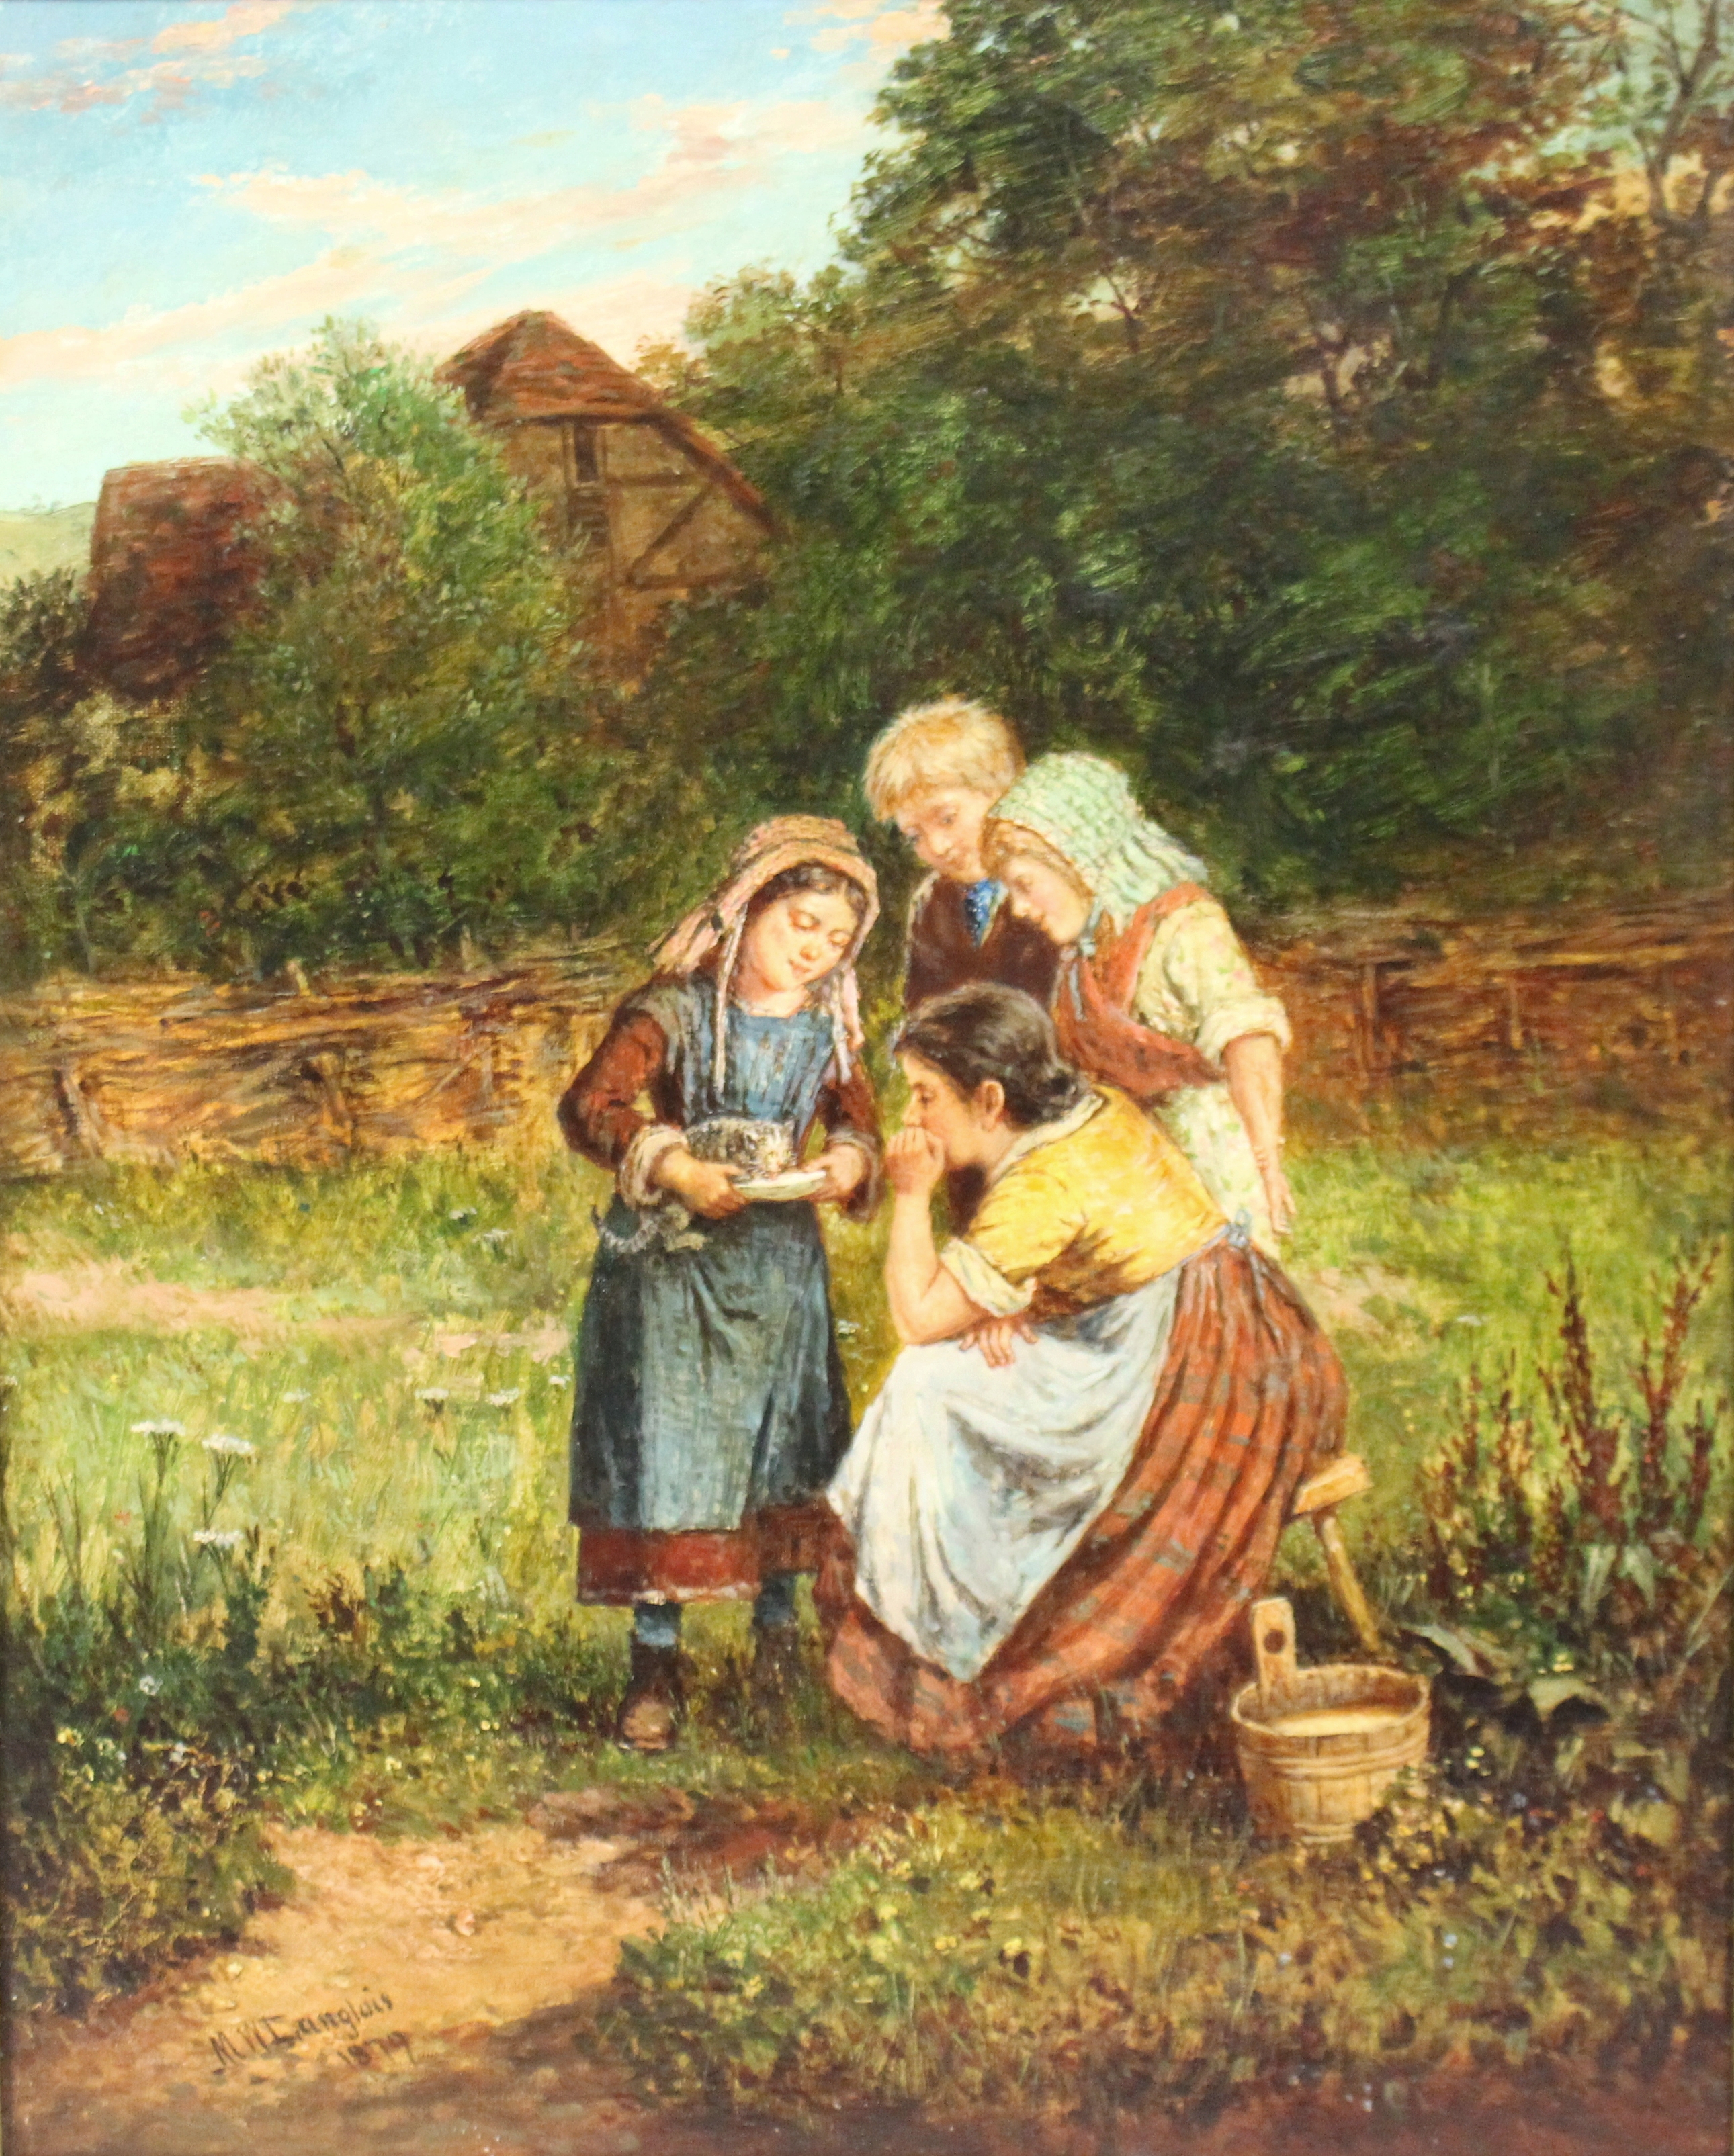 Feeding the Kitten by Mark William Langlois (British, 1848-1924) Oil on Canvas - Image 2 of 4